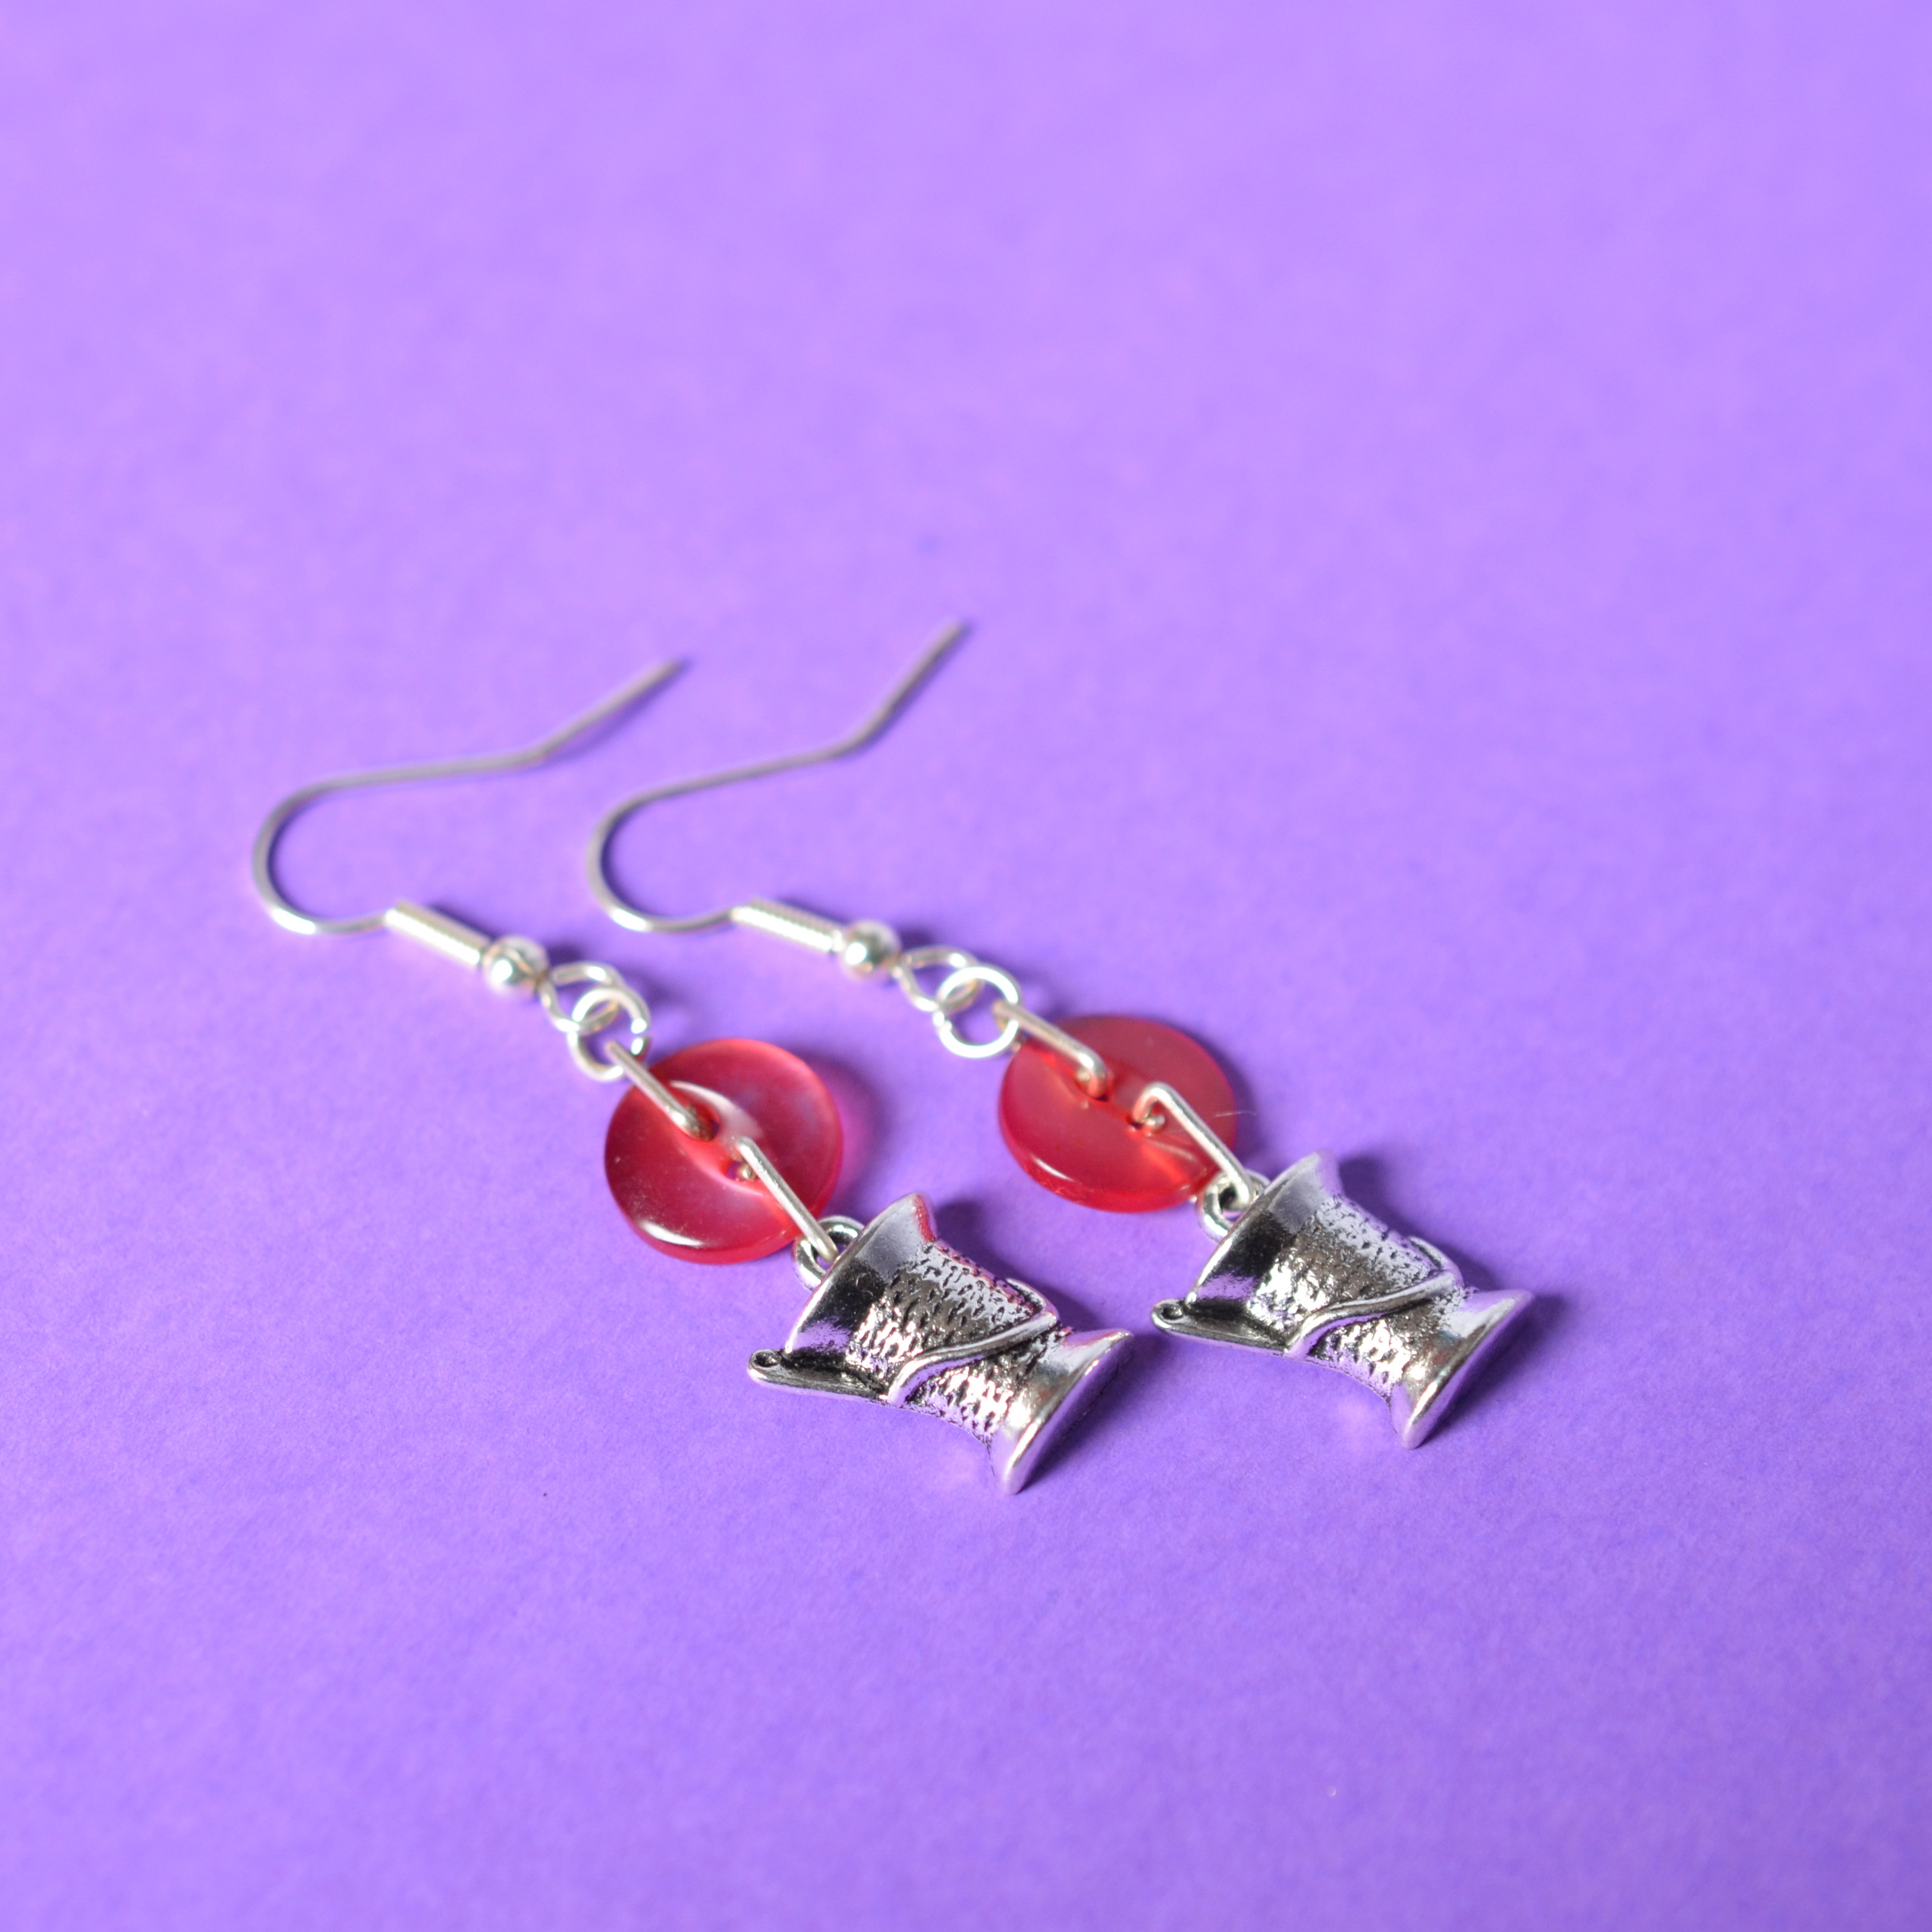 Sewing Thread One Button Charm Earrings